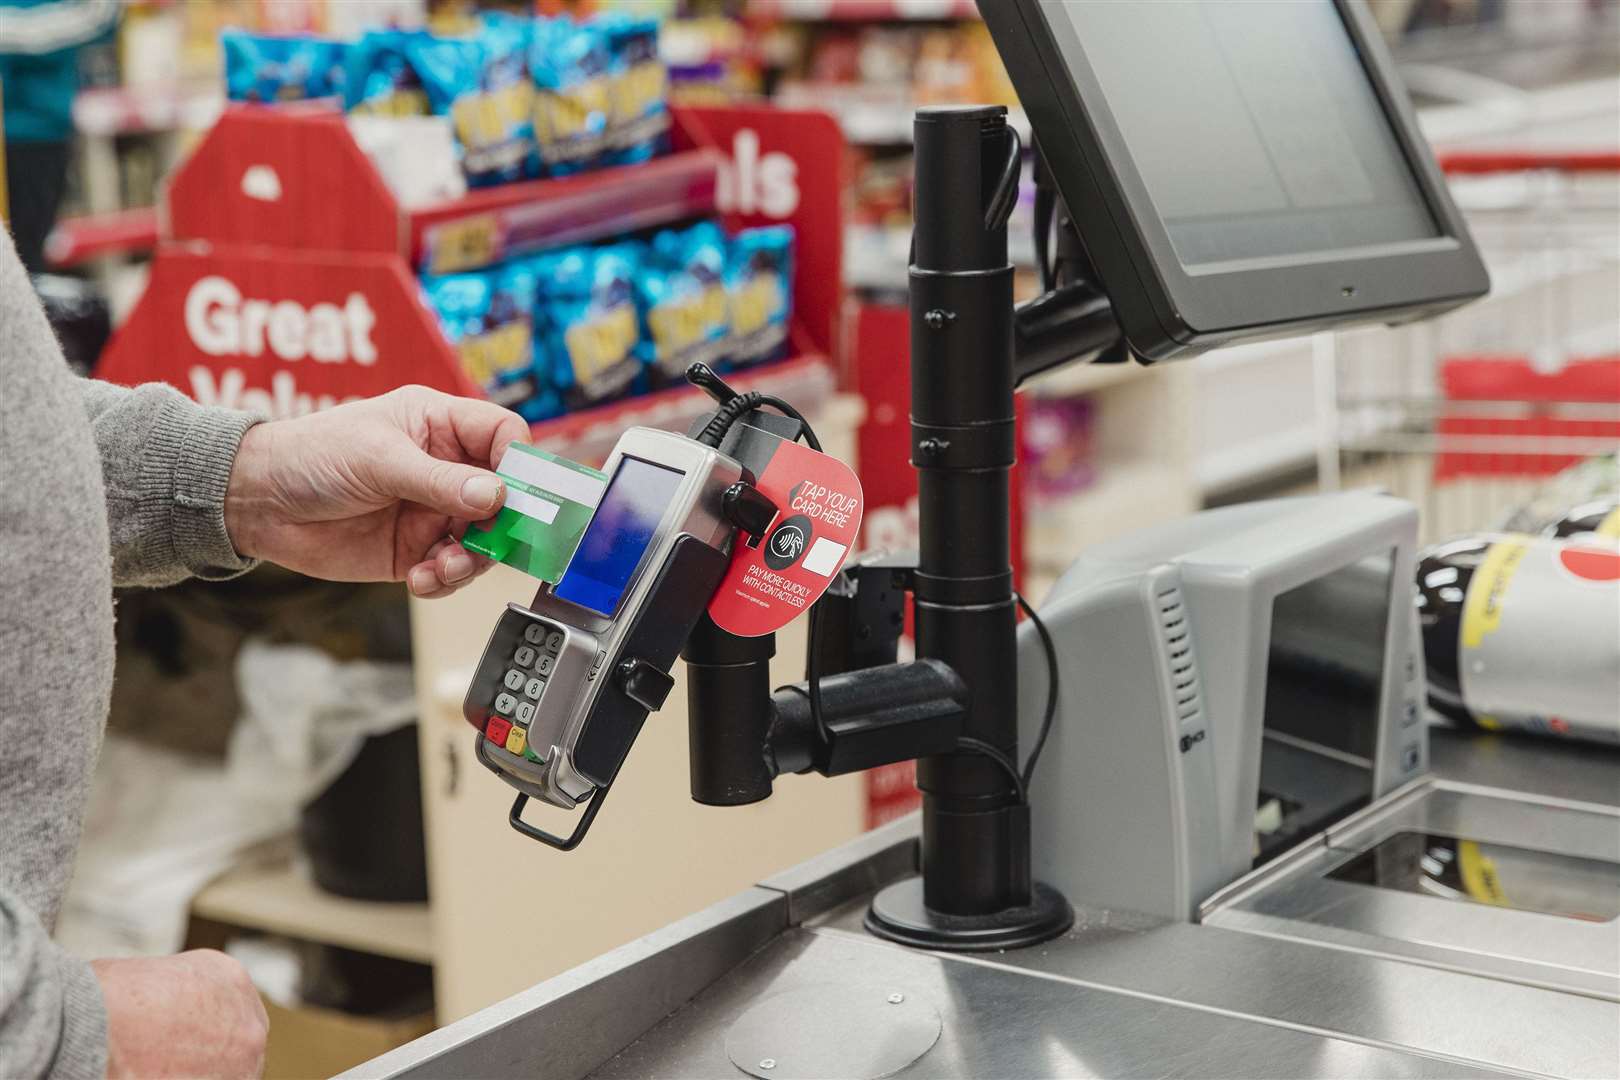 Shoppers will be able to pay for larger items such as fuel or the weekly food shop without using chip and pin, says the FCA